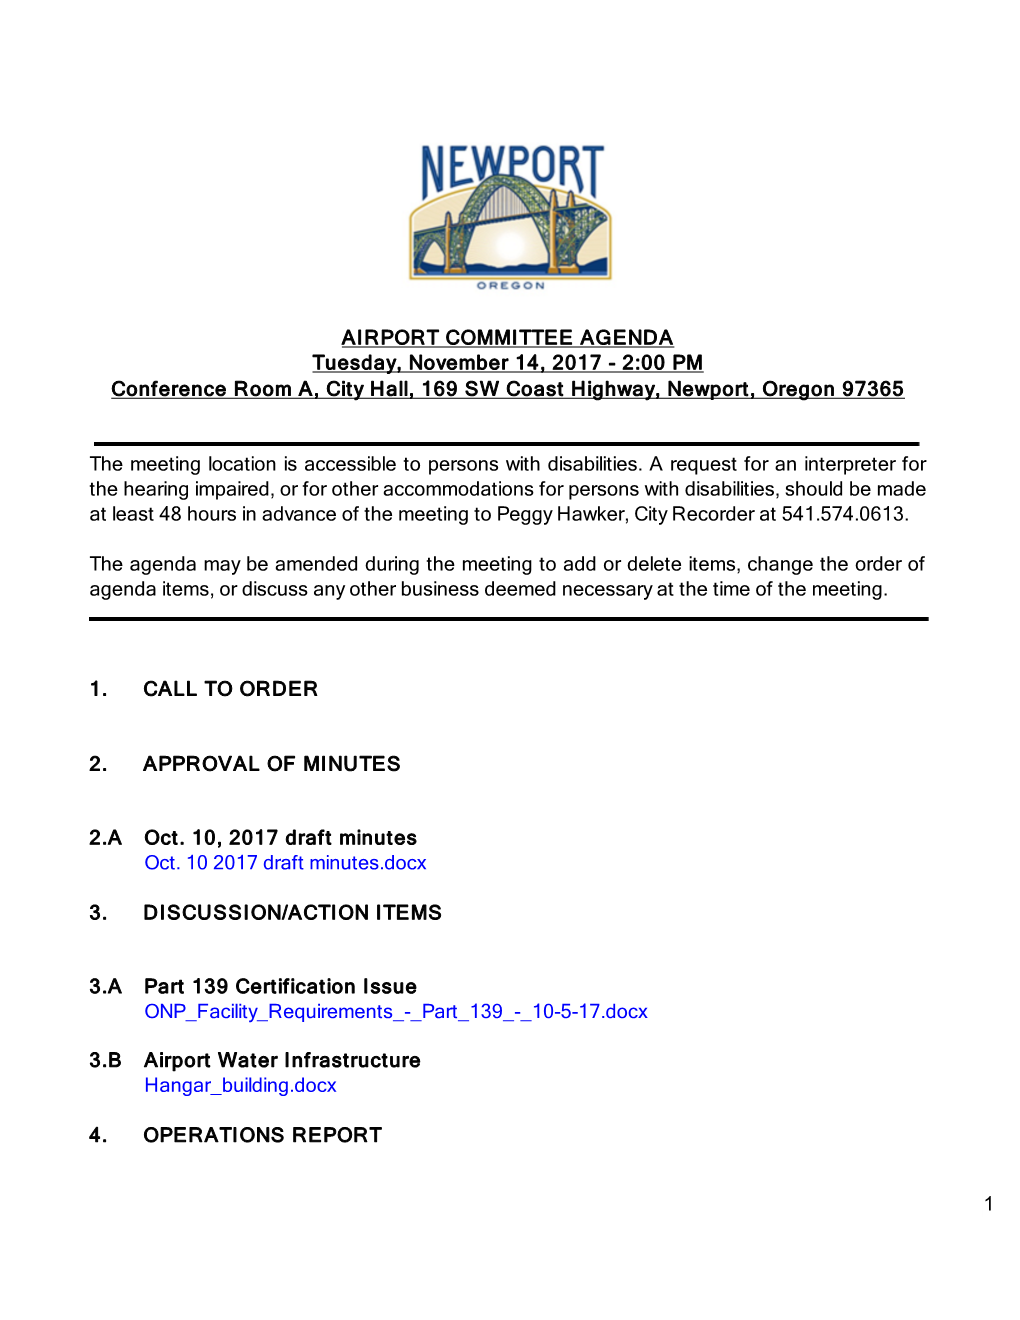 AIRPORT COMMITTEE AGENDA Tuesday, November 14, 2017 - 2:00 PM Conference Room A, City Hall, 169 SW Coast Highway, Newport, Oregon 97365